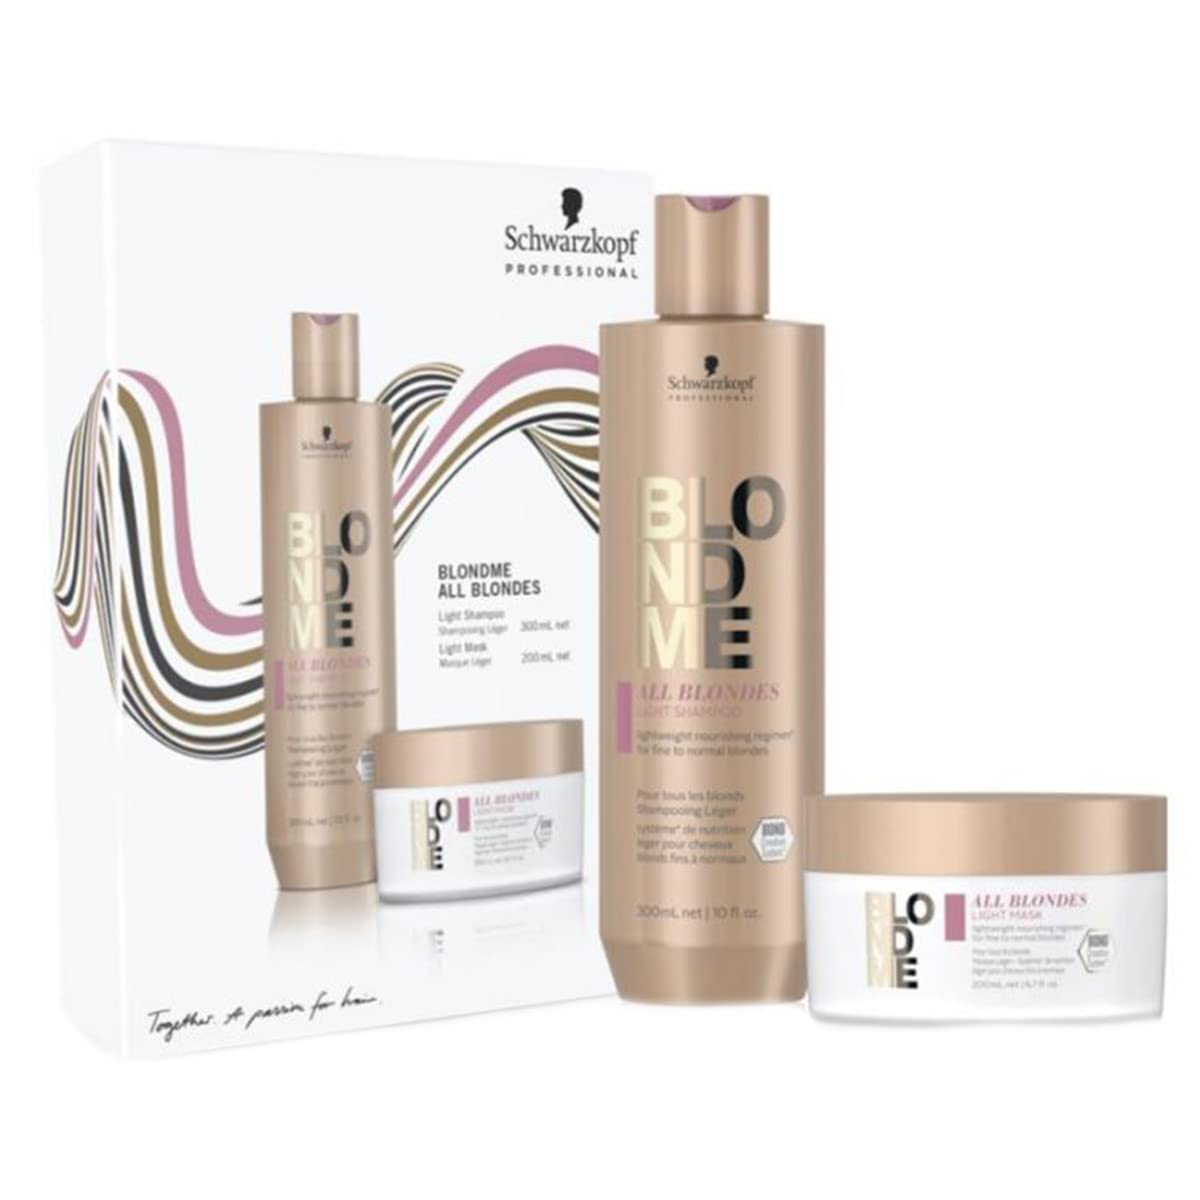 Blond Me All Blondes Light Giftset